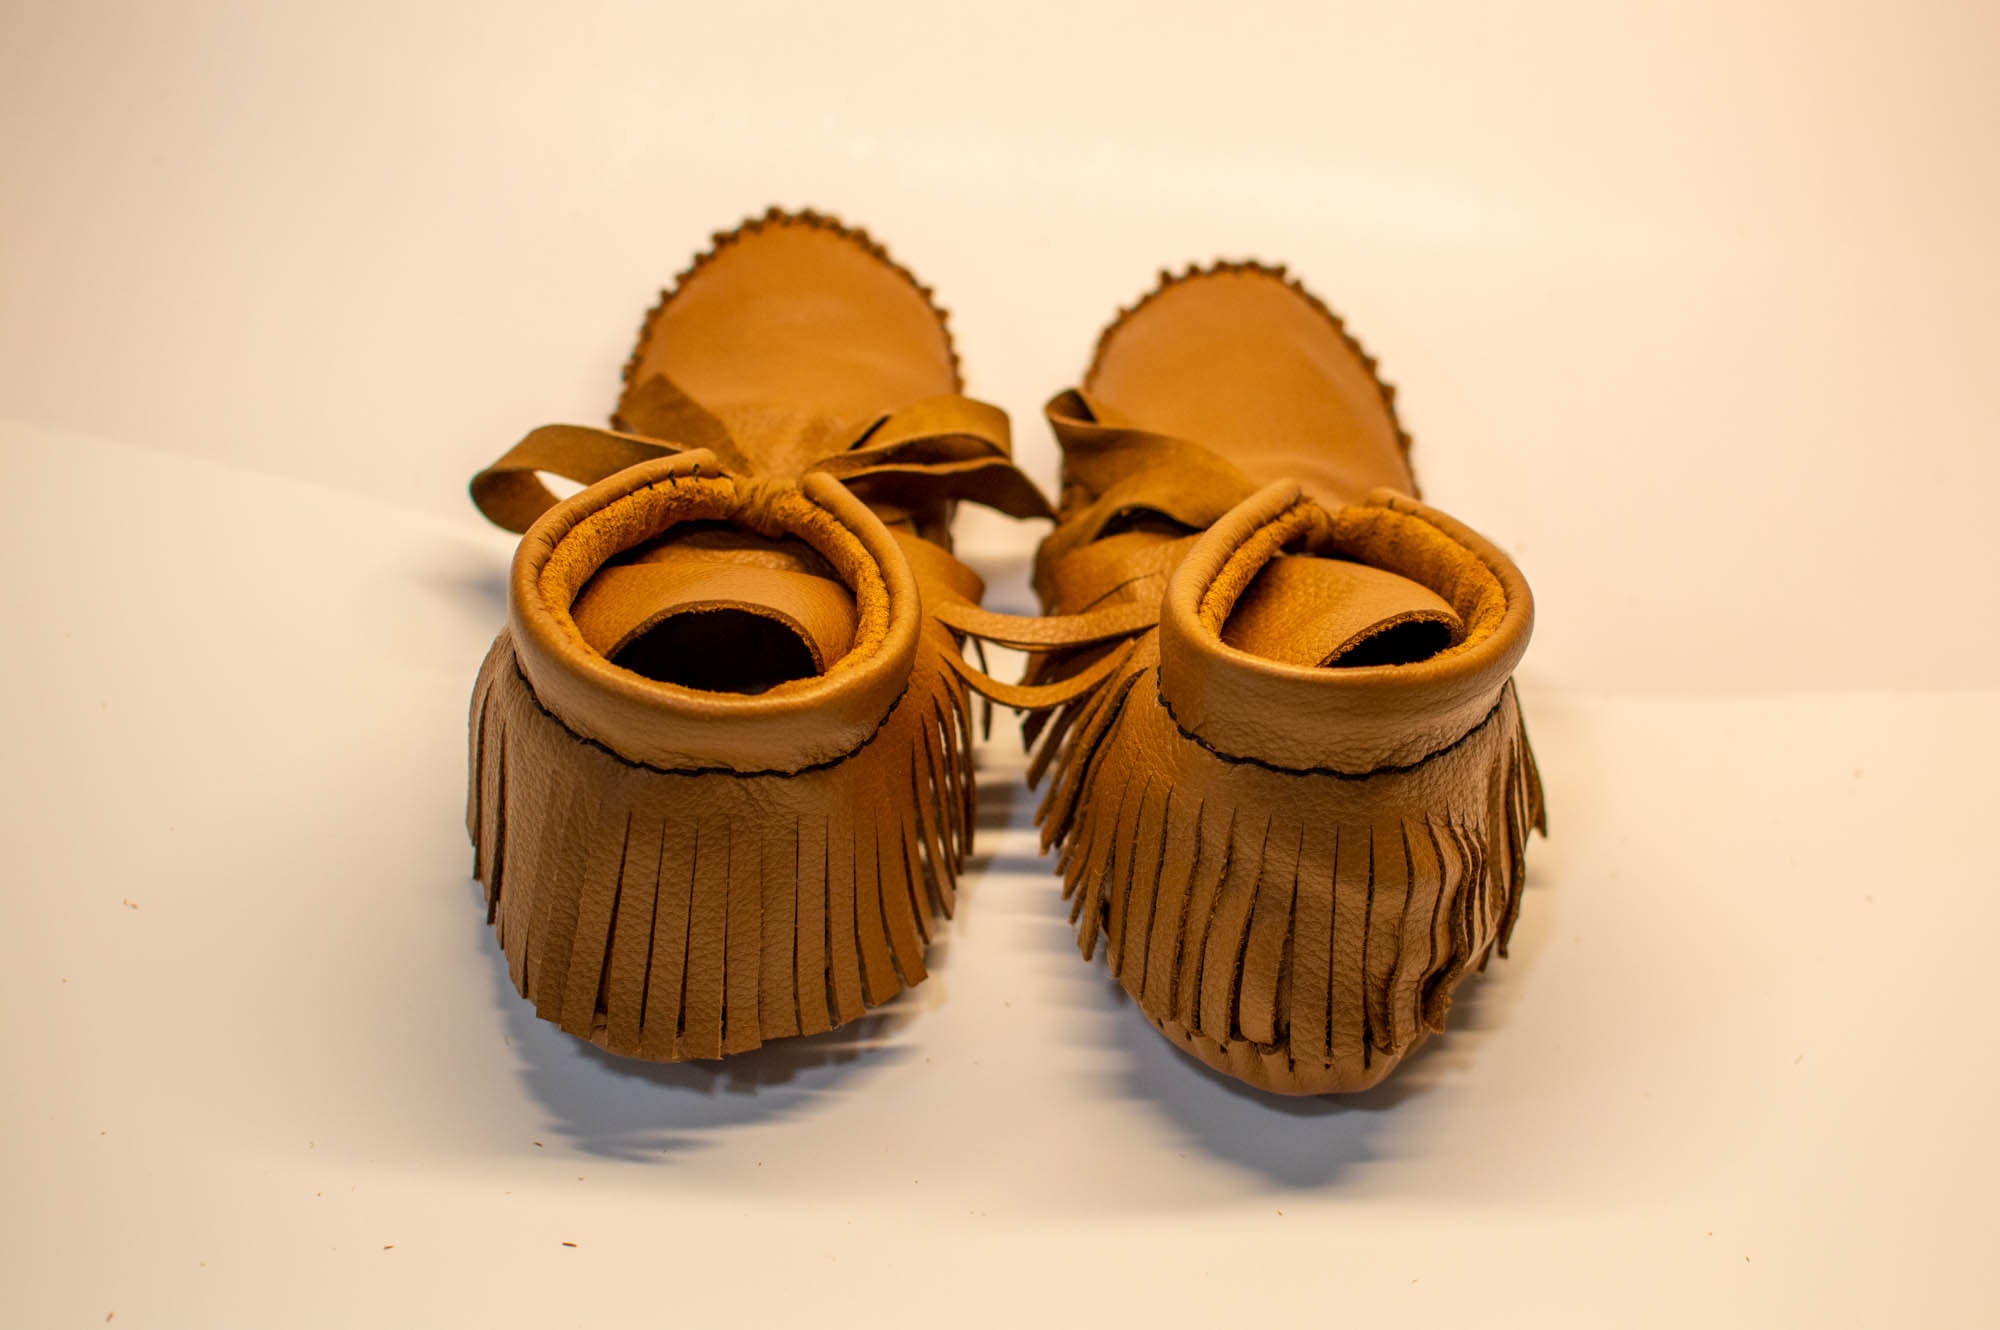 hunting boots Schoenen damesschoenen Instappers Mocassins Moccasin Boots Great leather slippers hiking boots Women and mens moccasins. or LARP shoes 